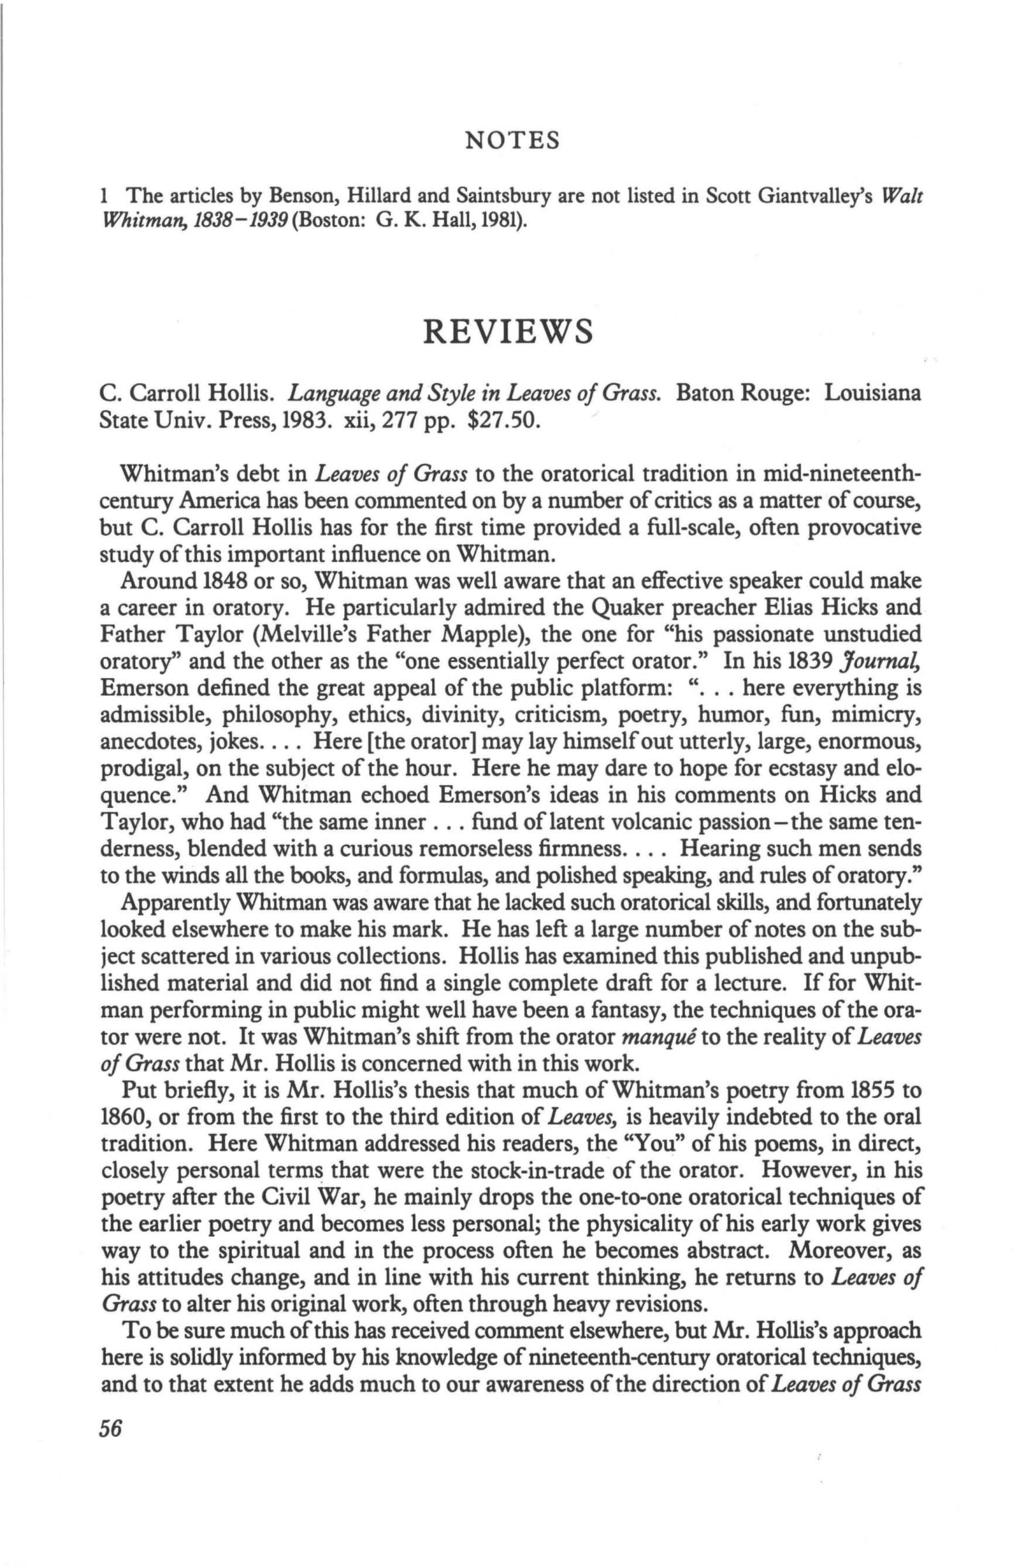 NOTES 1 The articles by Benson, Hillard and Saintsbury are not listed in Scott Giantvalley's Walt Whitman, 1838-1939 (Boston: G. K. Hall, 1981). REVIEWS C. Carroll Hollis.